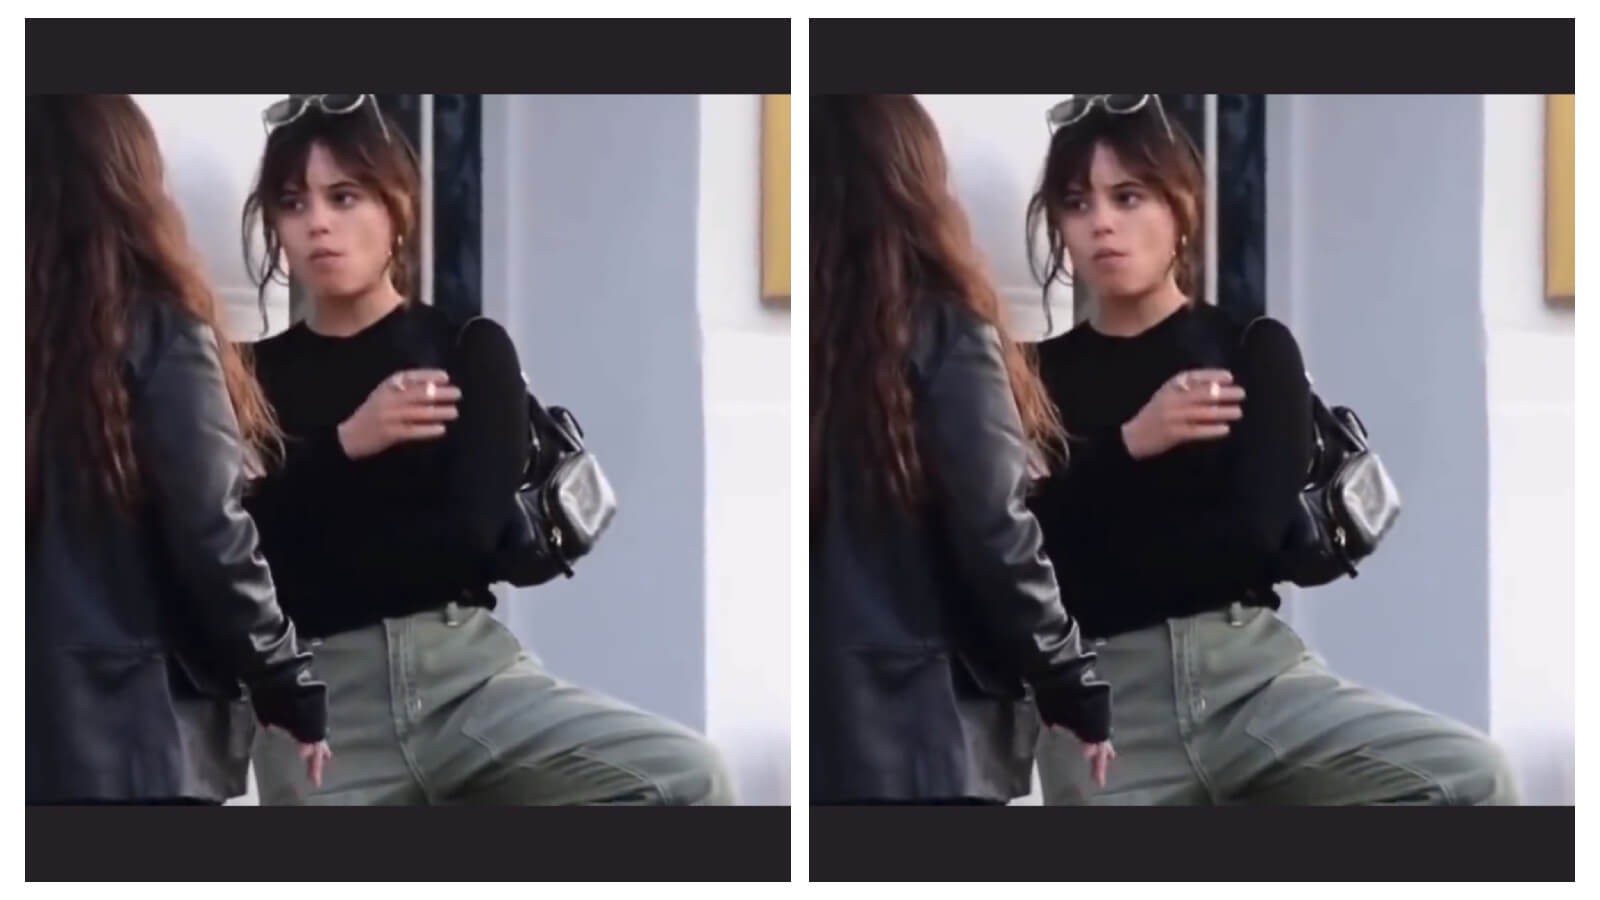 Jenna Ortega spotted smoking in public with a friend